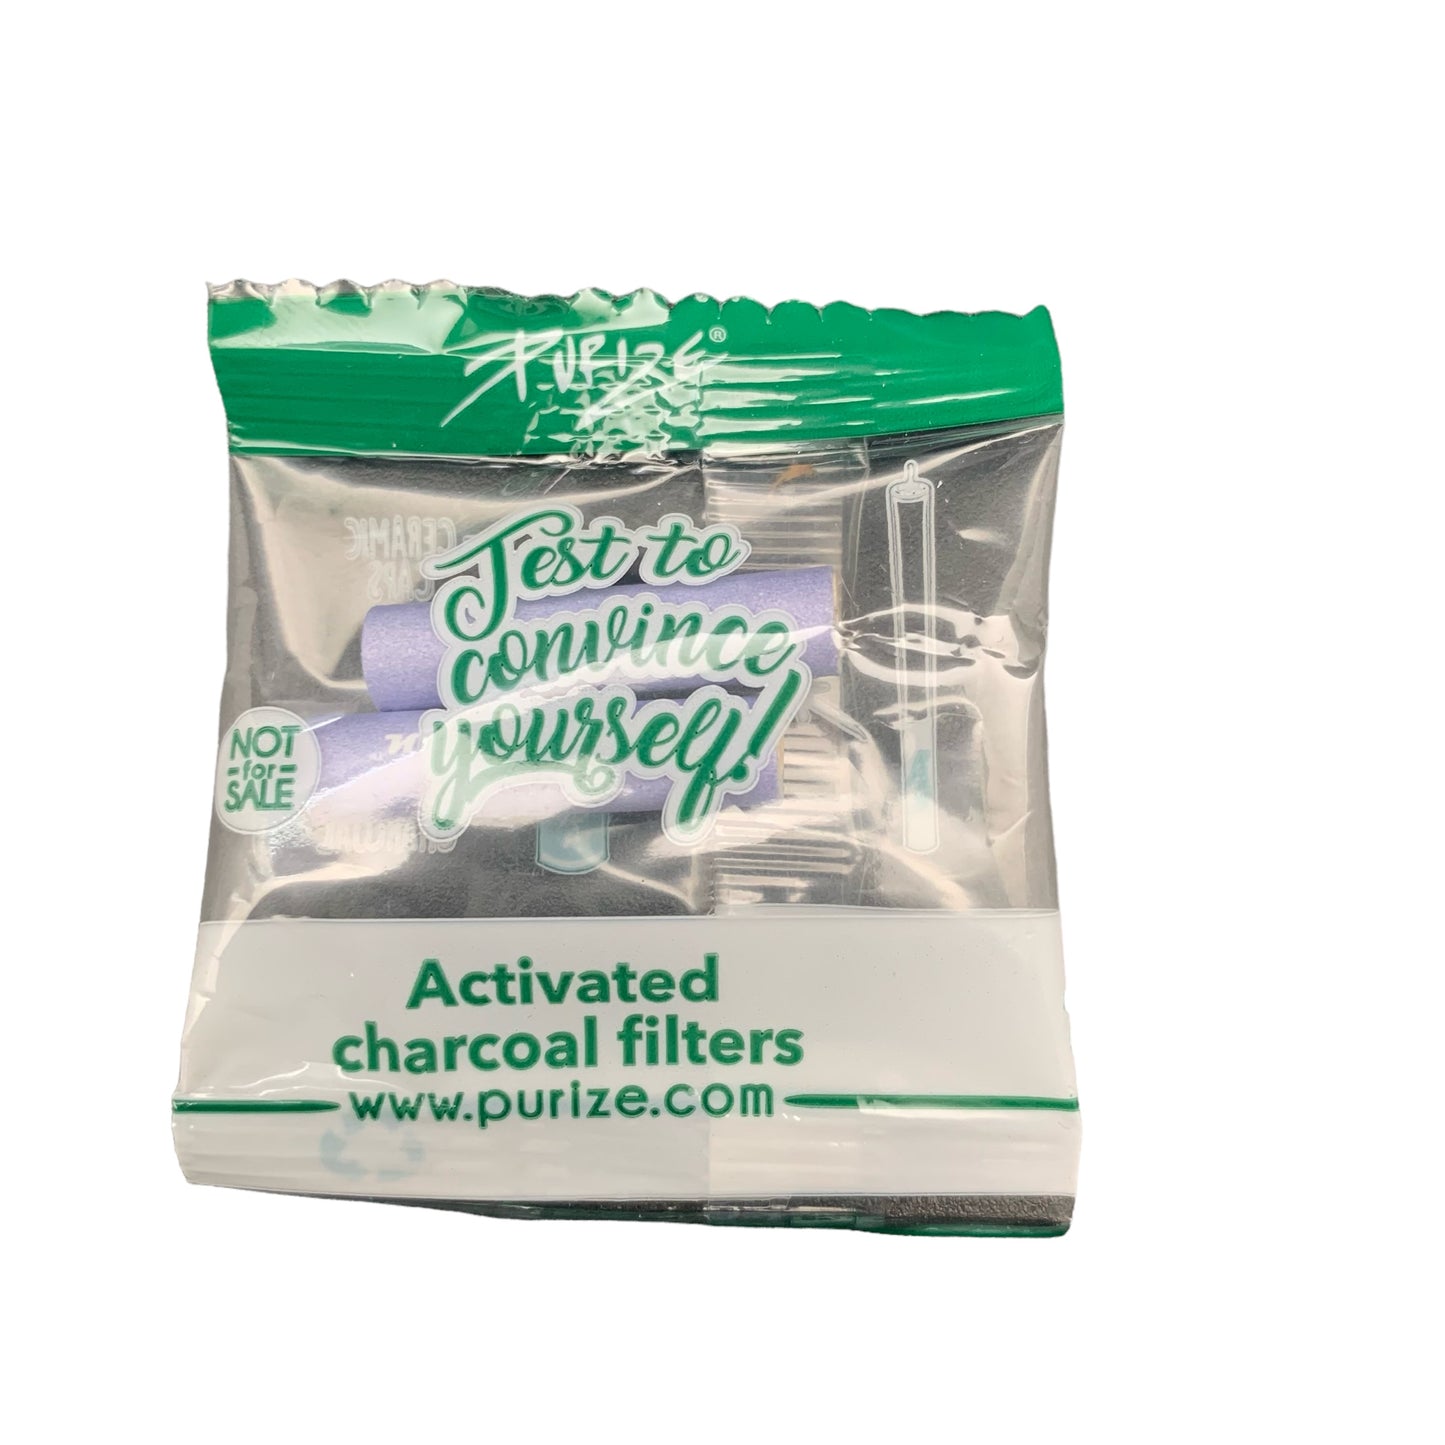 Blazy Susan Activated Charcoal Filter Tips- 2ct, 25ct Bag (Color Options Available) (B2B)